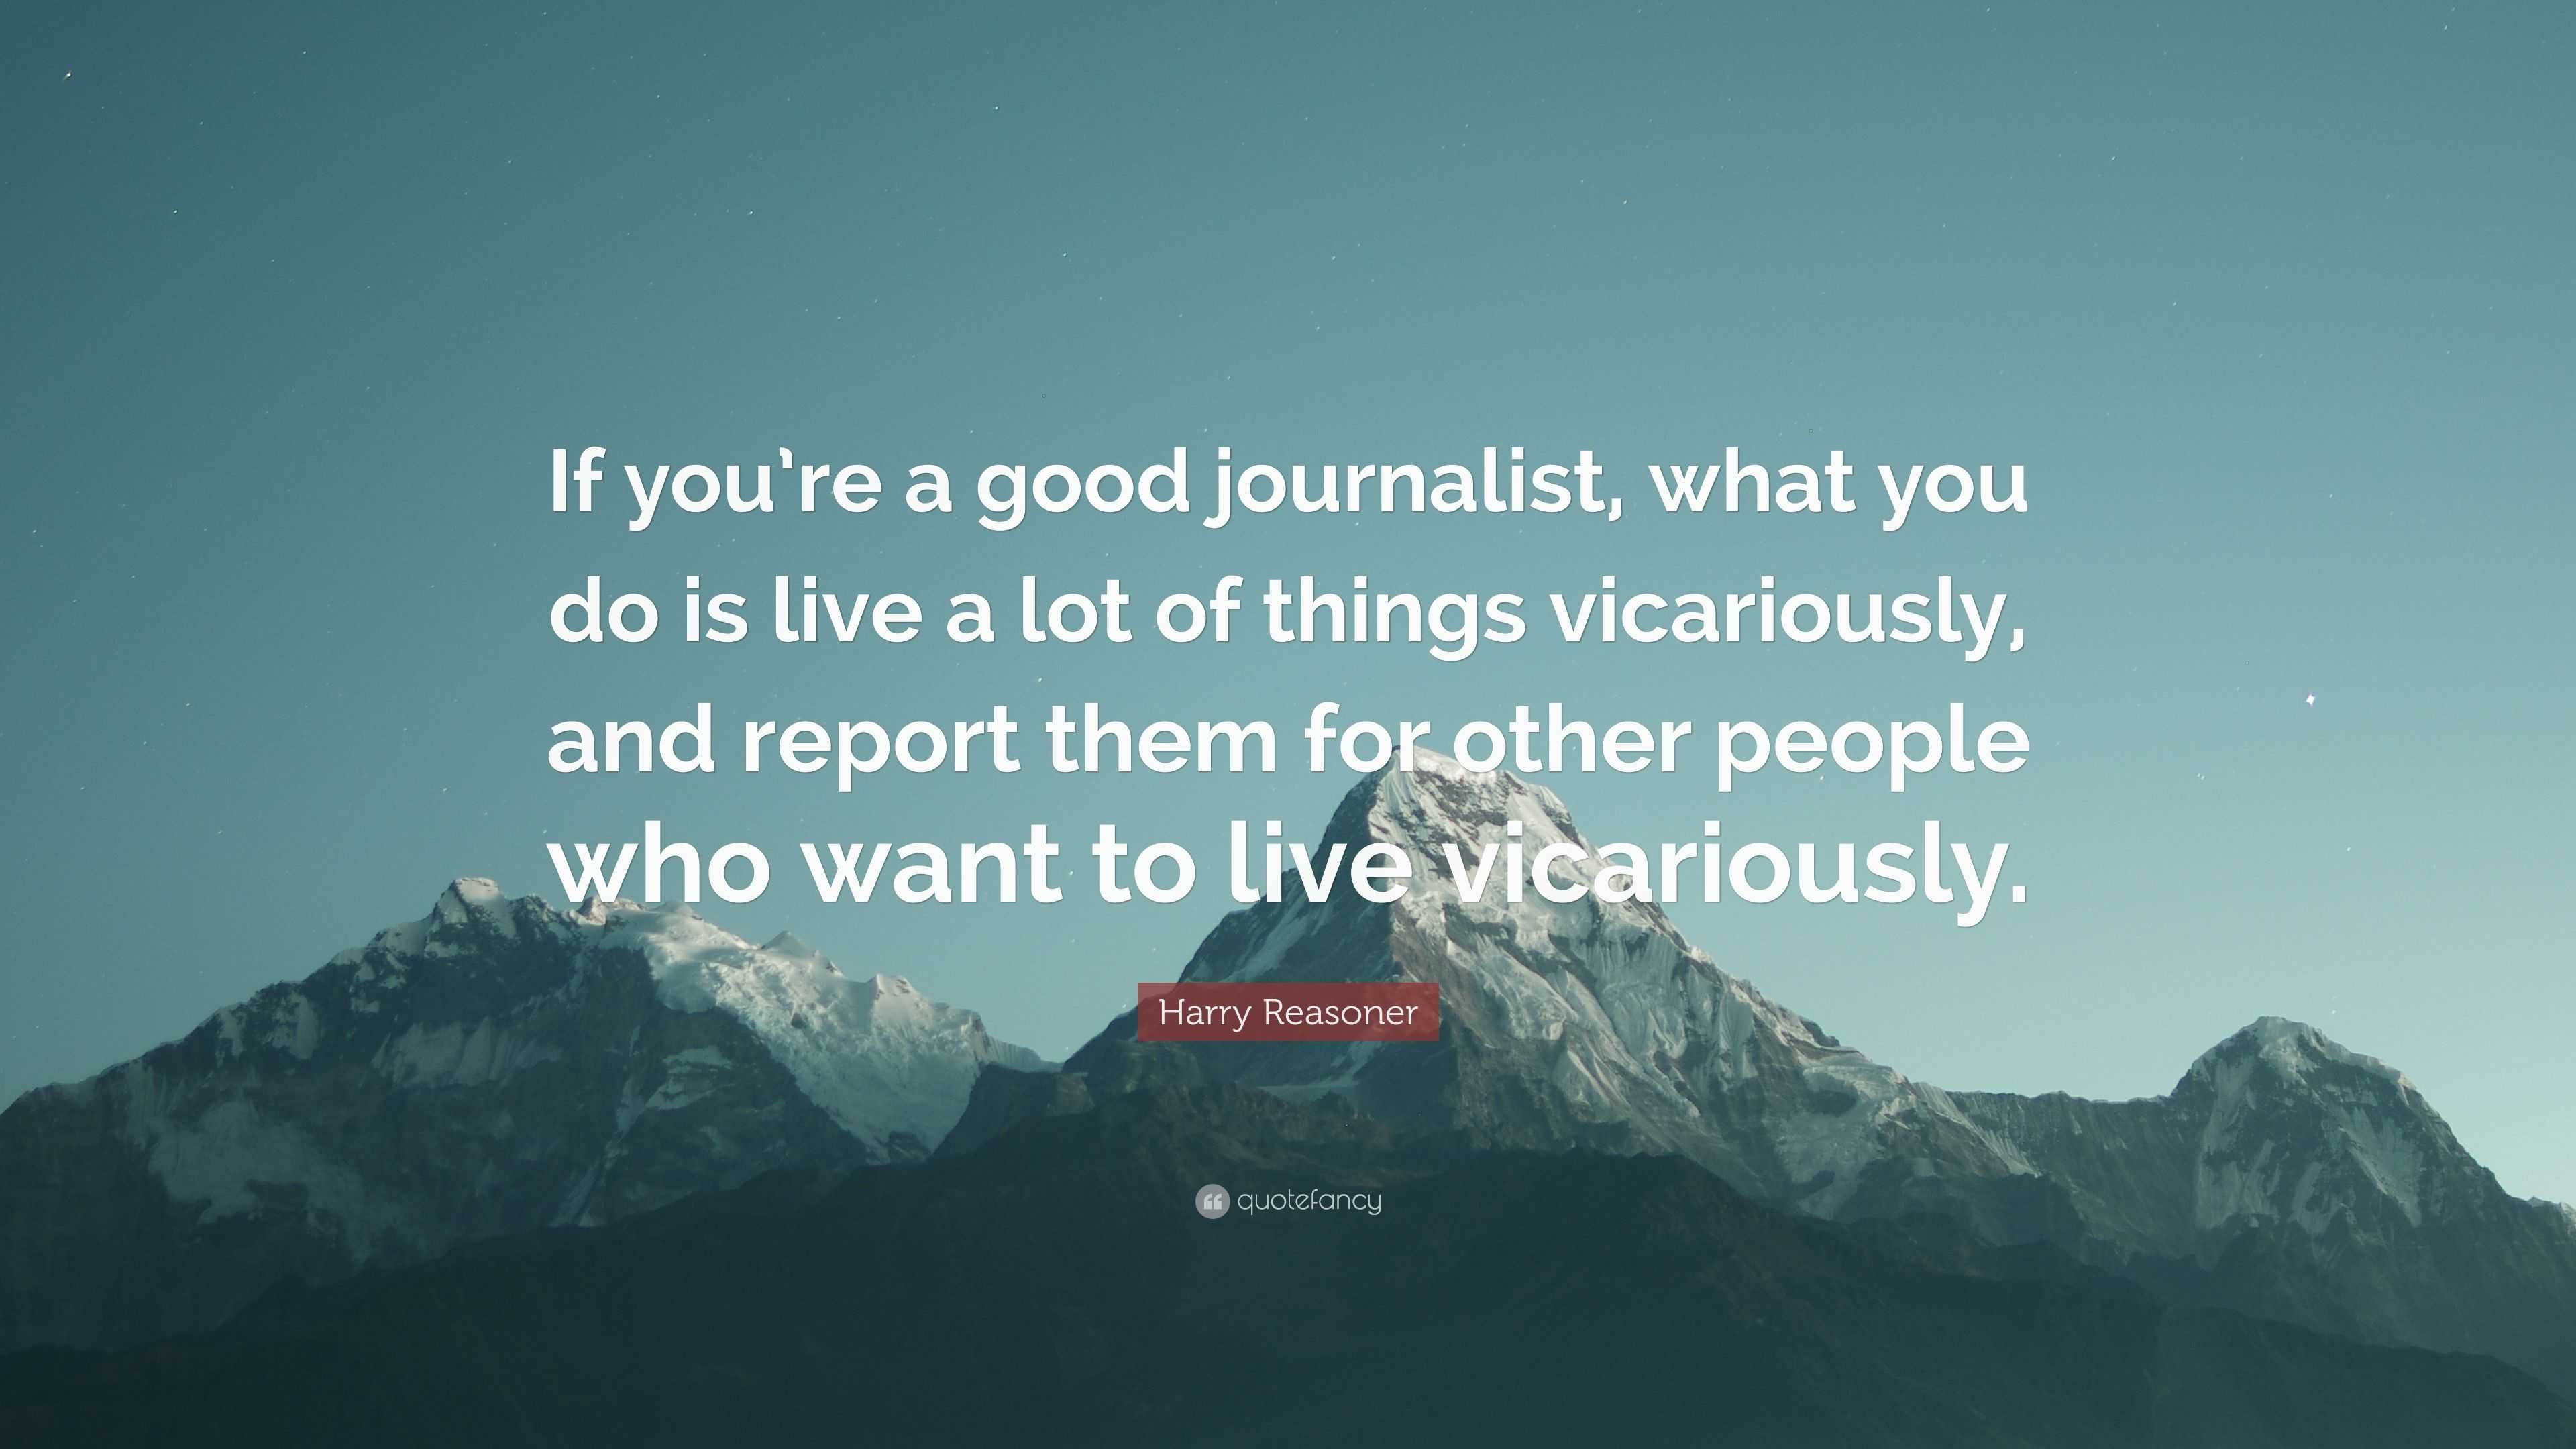 Harry Reasoner Quote “if Youre A Good Journalist What You Do Is Live A Lot Of Things 0481